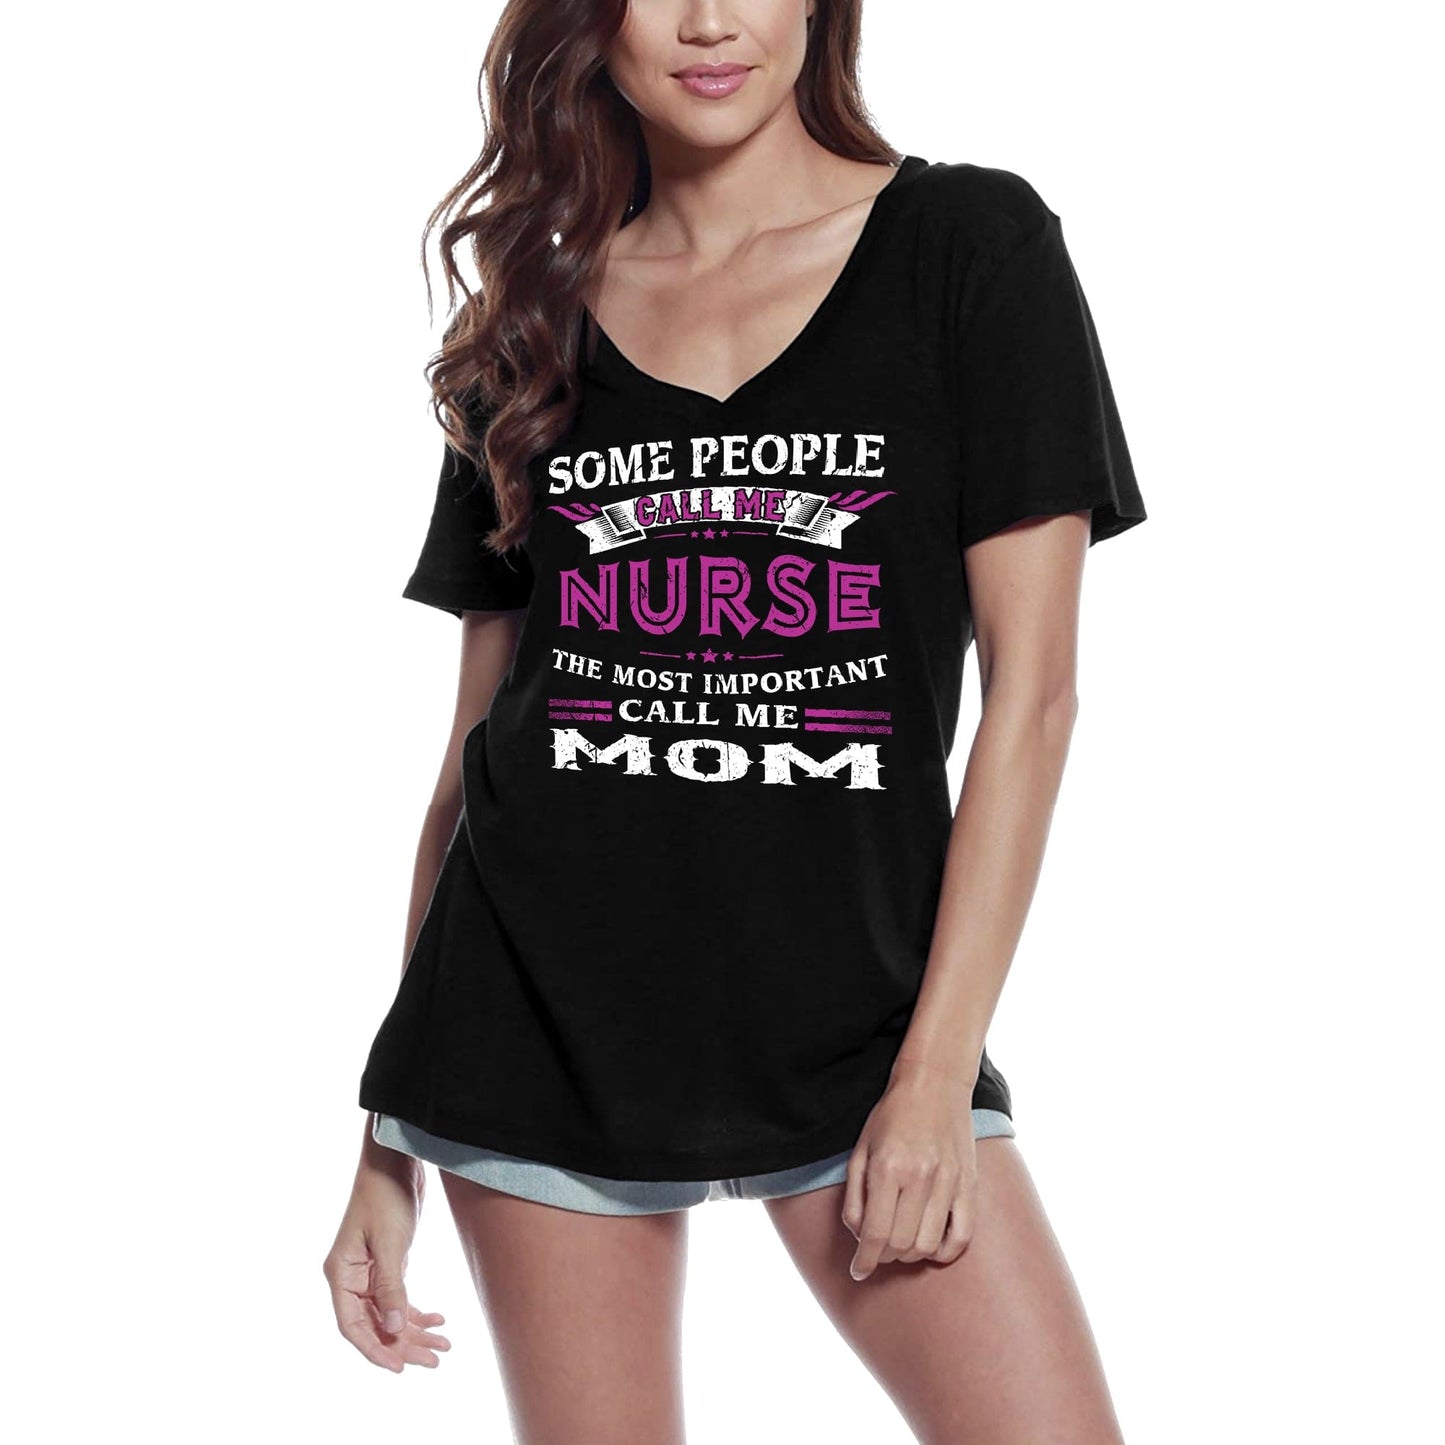 ULTRABASIC Women's T-Shirt Some People Call Me Nurse Most Important Call Me Mom Tee Shirt